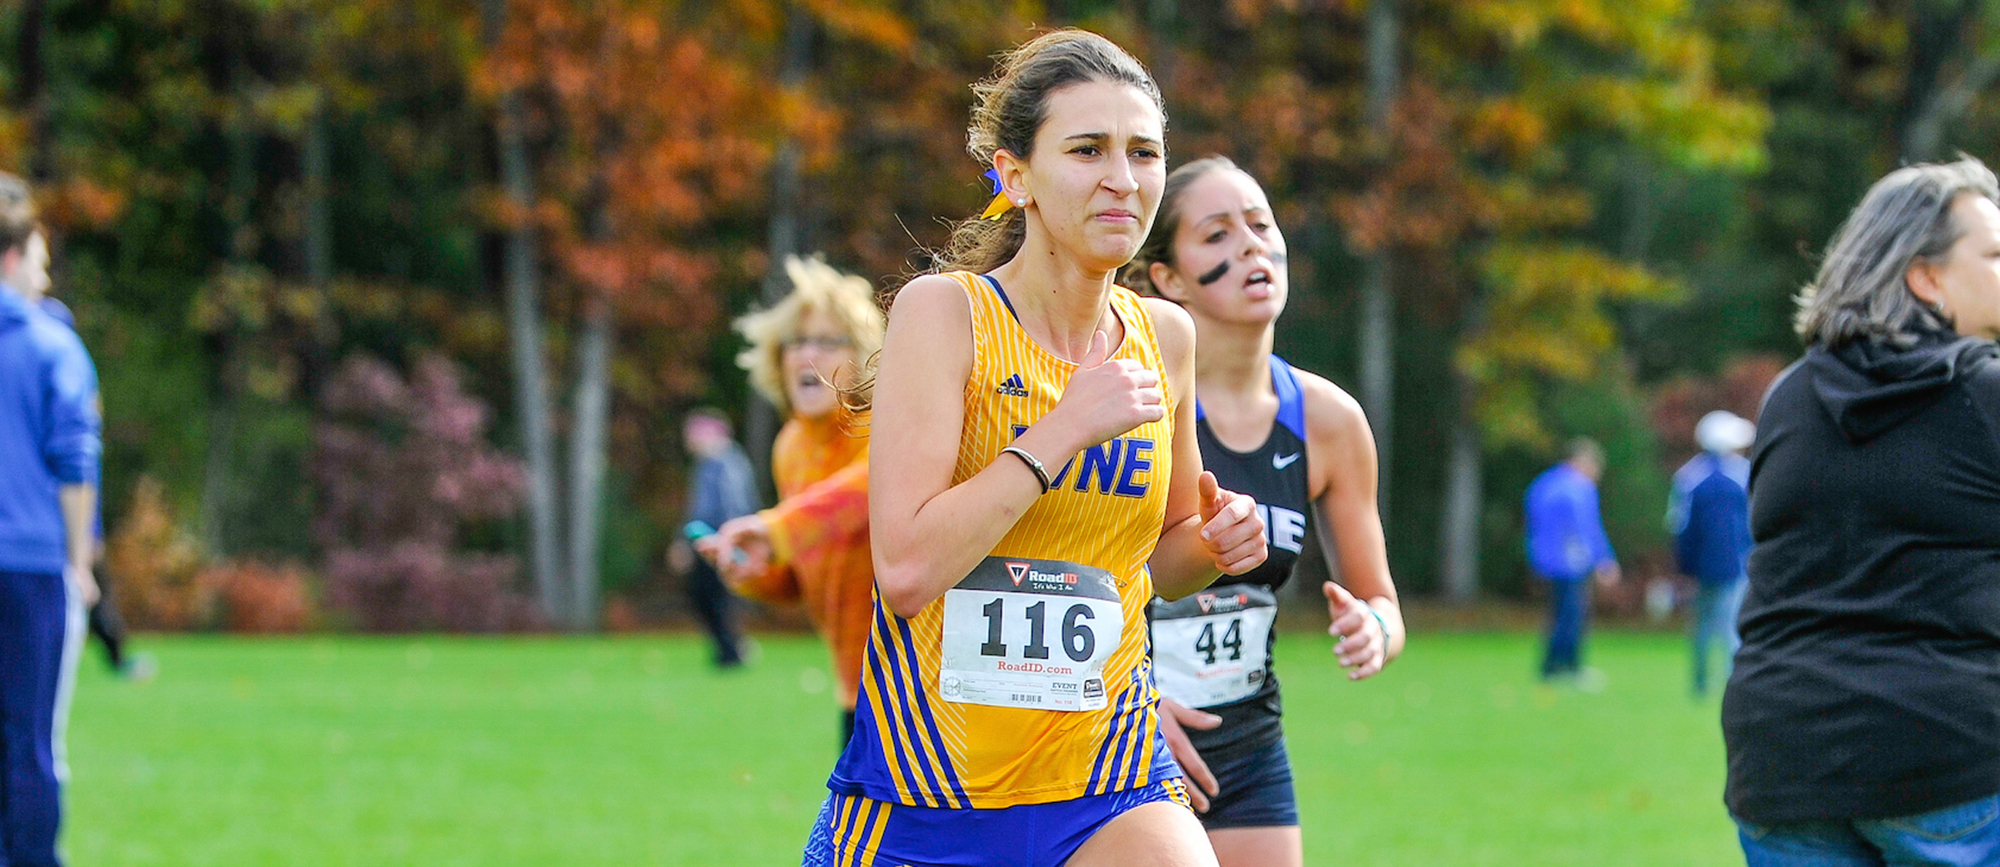 Senior Kathleen Silveira finished 12th overall on Saturday at the Elms College Blazer Invitational. (Photo by Bill Sharon/Spartan SportShots)